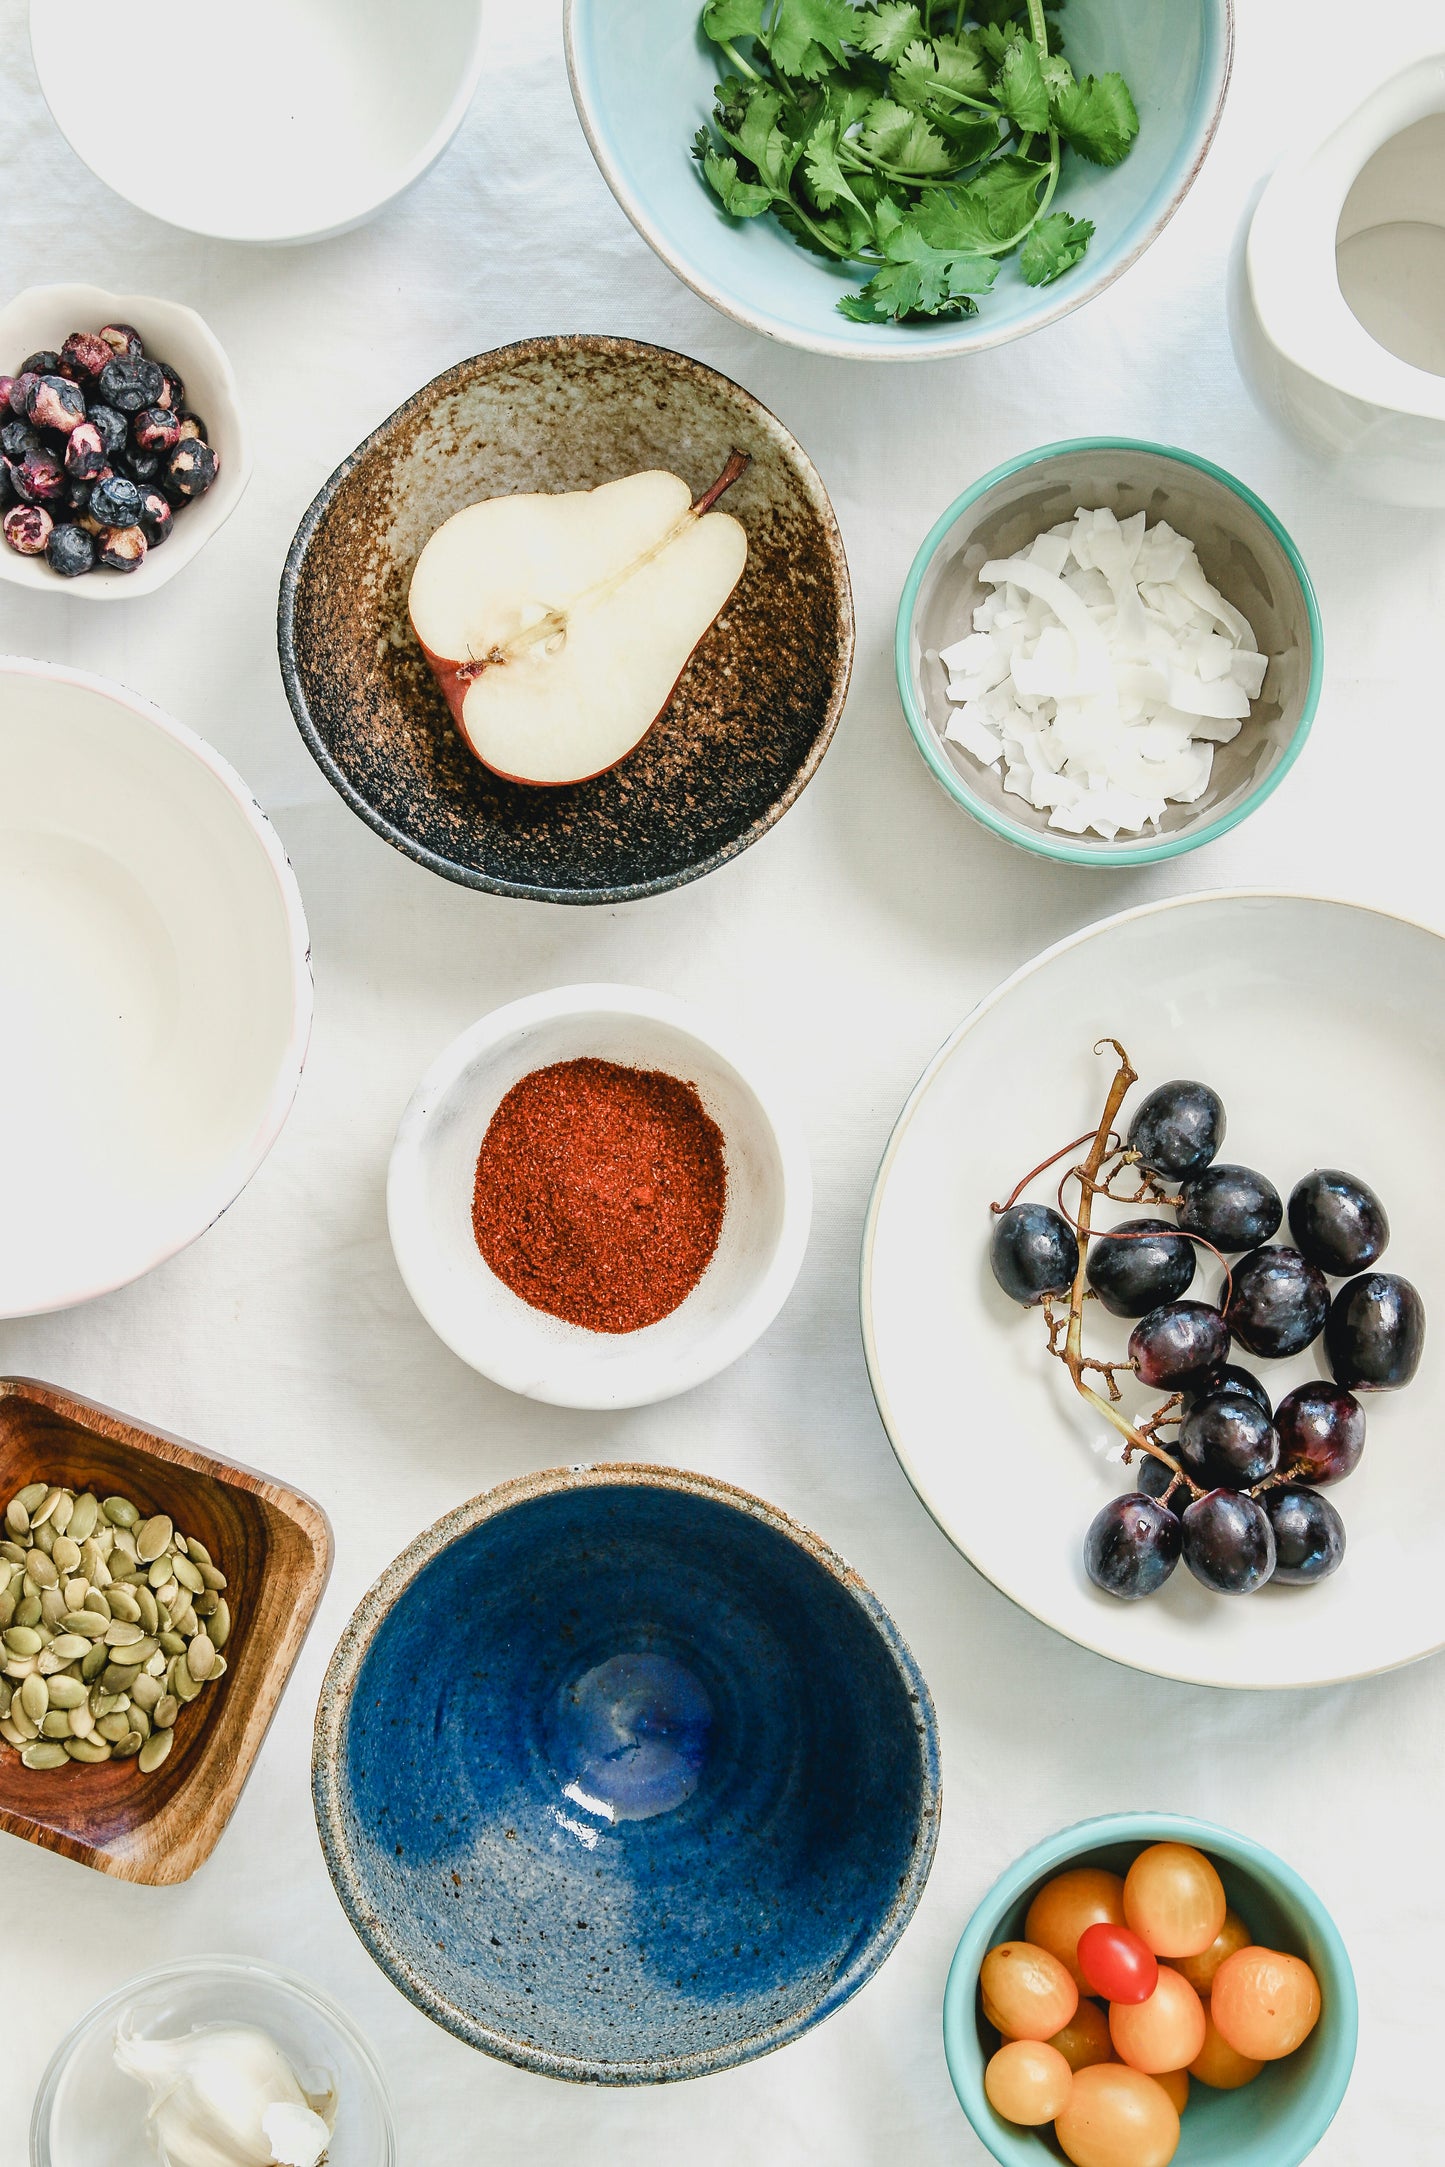 Nourish Your Body, Calm Your Inflammation: The Healing Power of an Anti-Inflammatory Diet